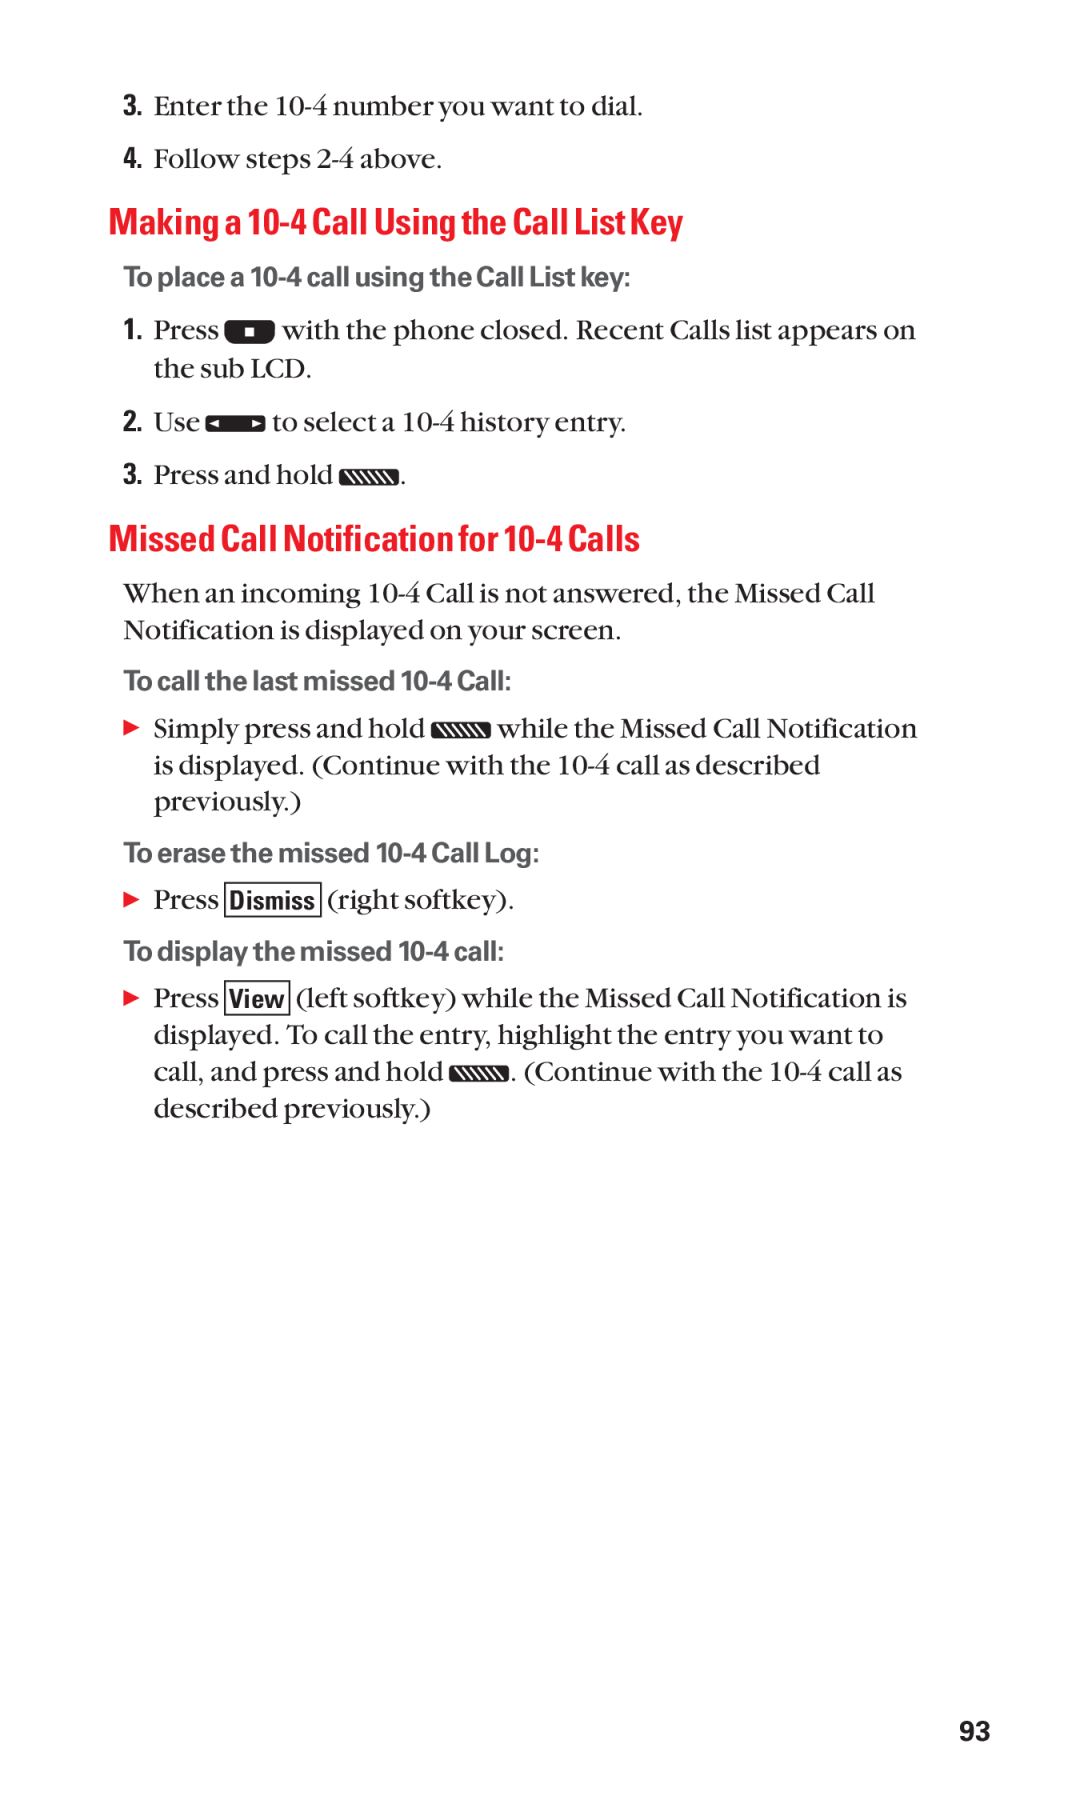 Sanyo SCP-7050 manual Making a 10-4 Call Using the Call List Key, Missed Call Notification for 10-4 Calls 